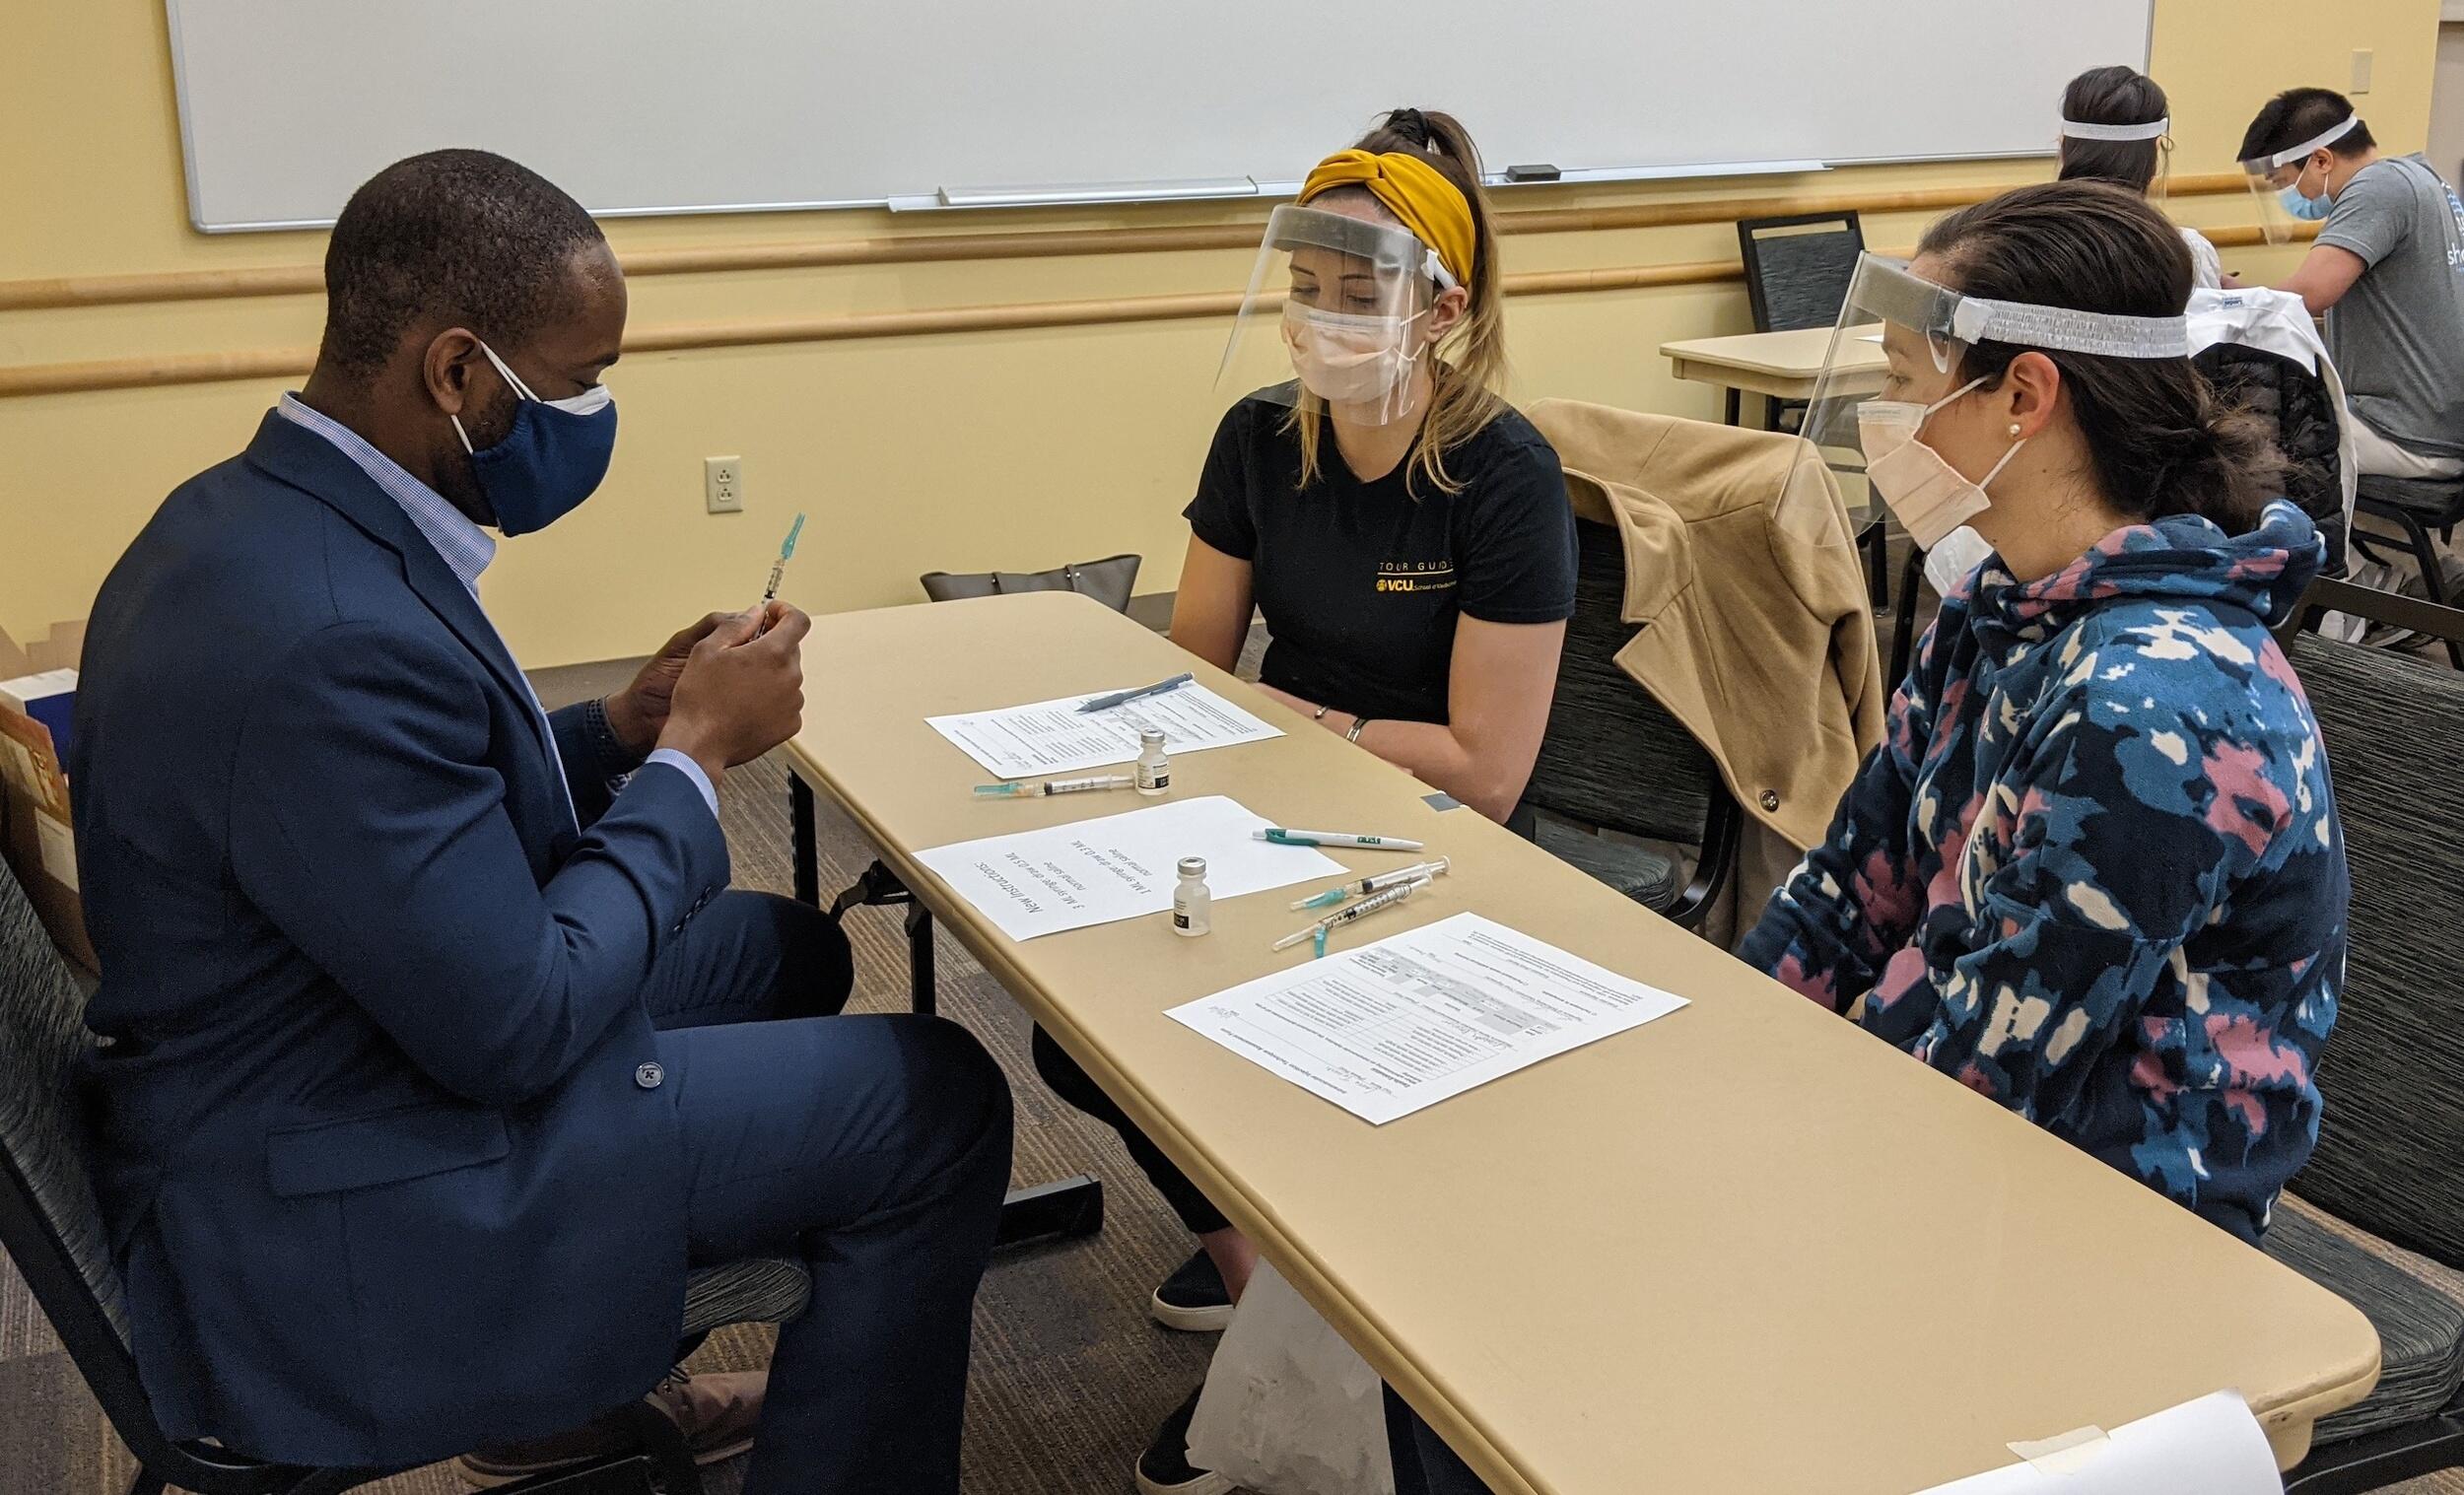 K.C. Ogbonna, VCU School of Pharmacy associate dean for admissions and student services, demonstrates to third-year medical students Elizabeth Kazarian and Laurne Terasaki how to draw up during an intramuscular (IM) injection training. (Courtesy of Elizabeth Micalizzi)